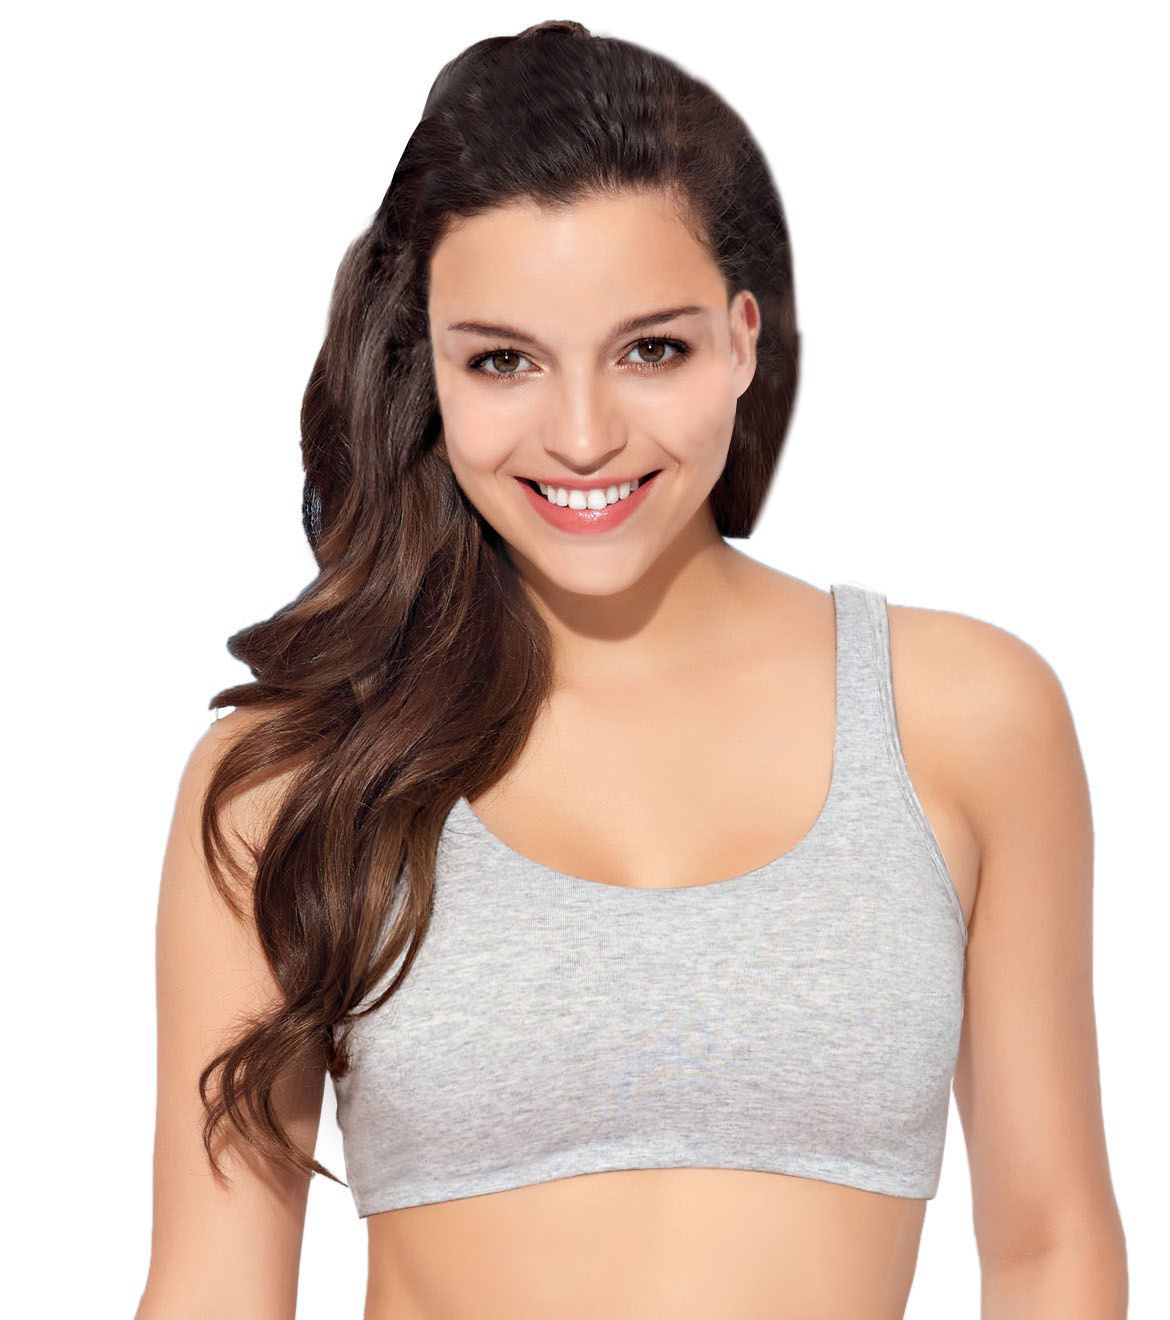 Buy Enamor Sb06 Low Impact Cotton Sports Bra Non-Padded & Wirefree - Nude  online